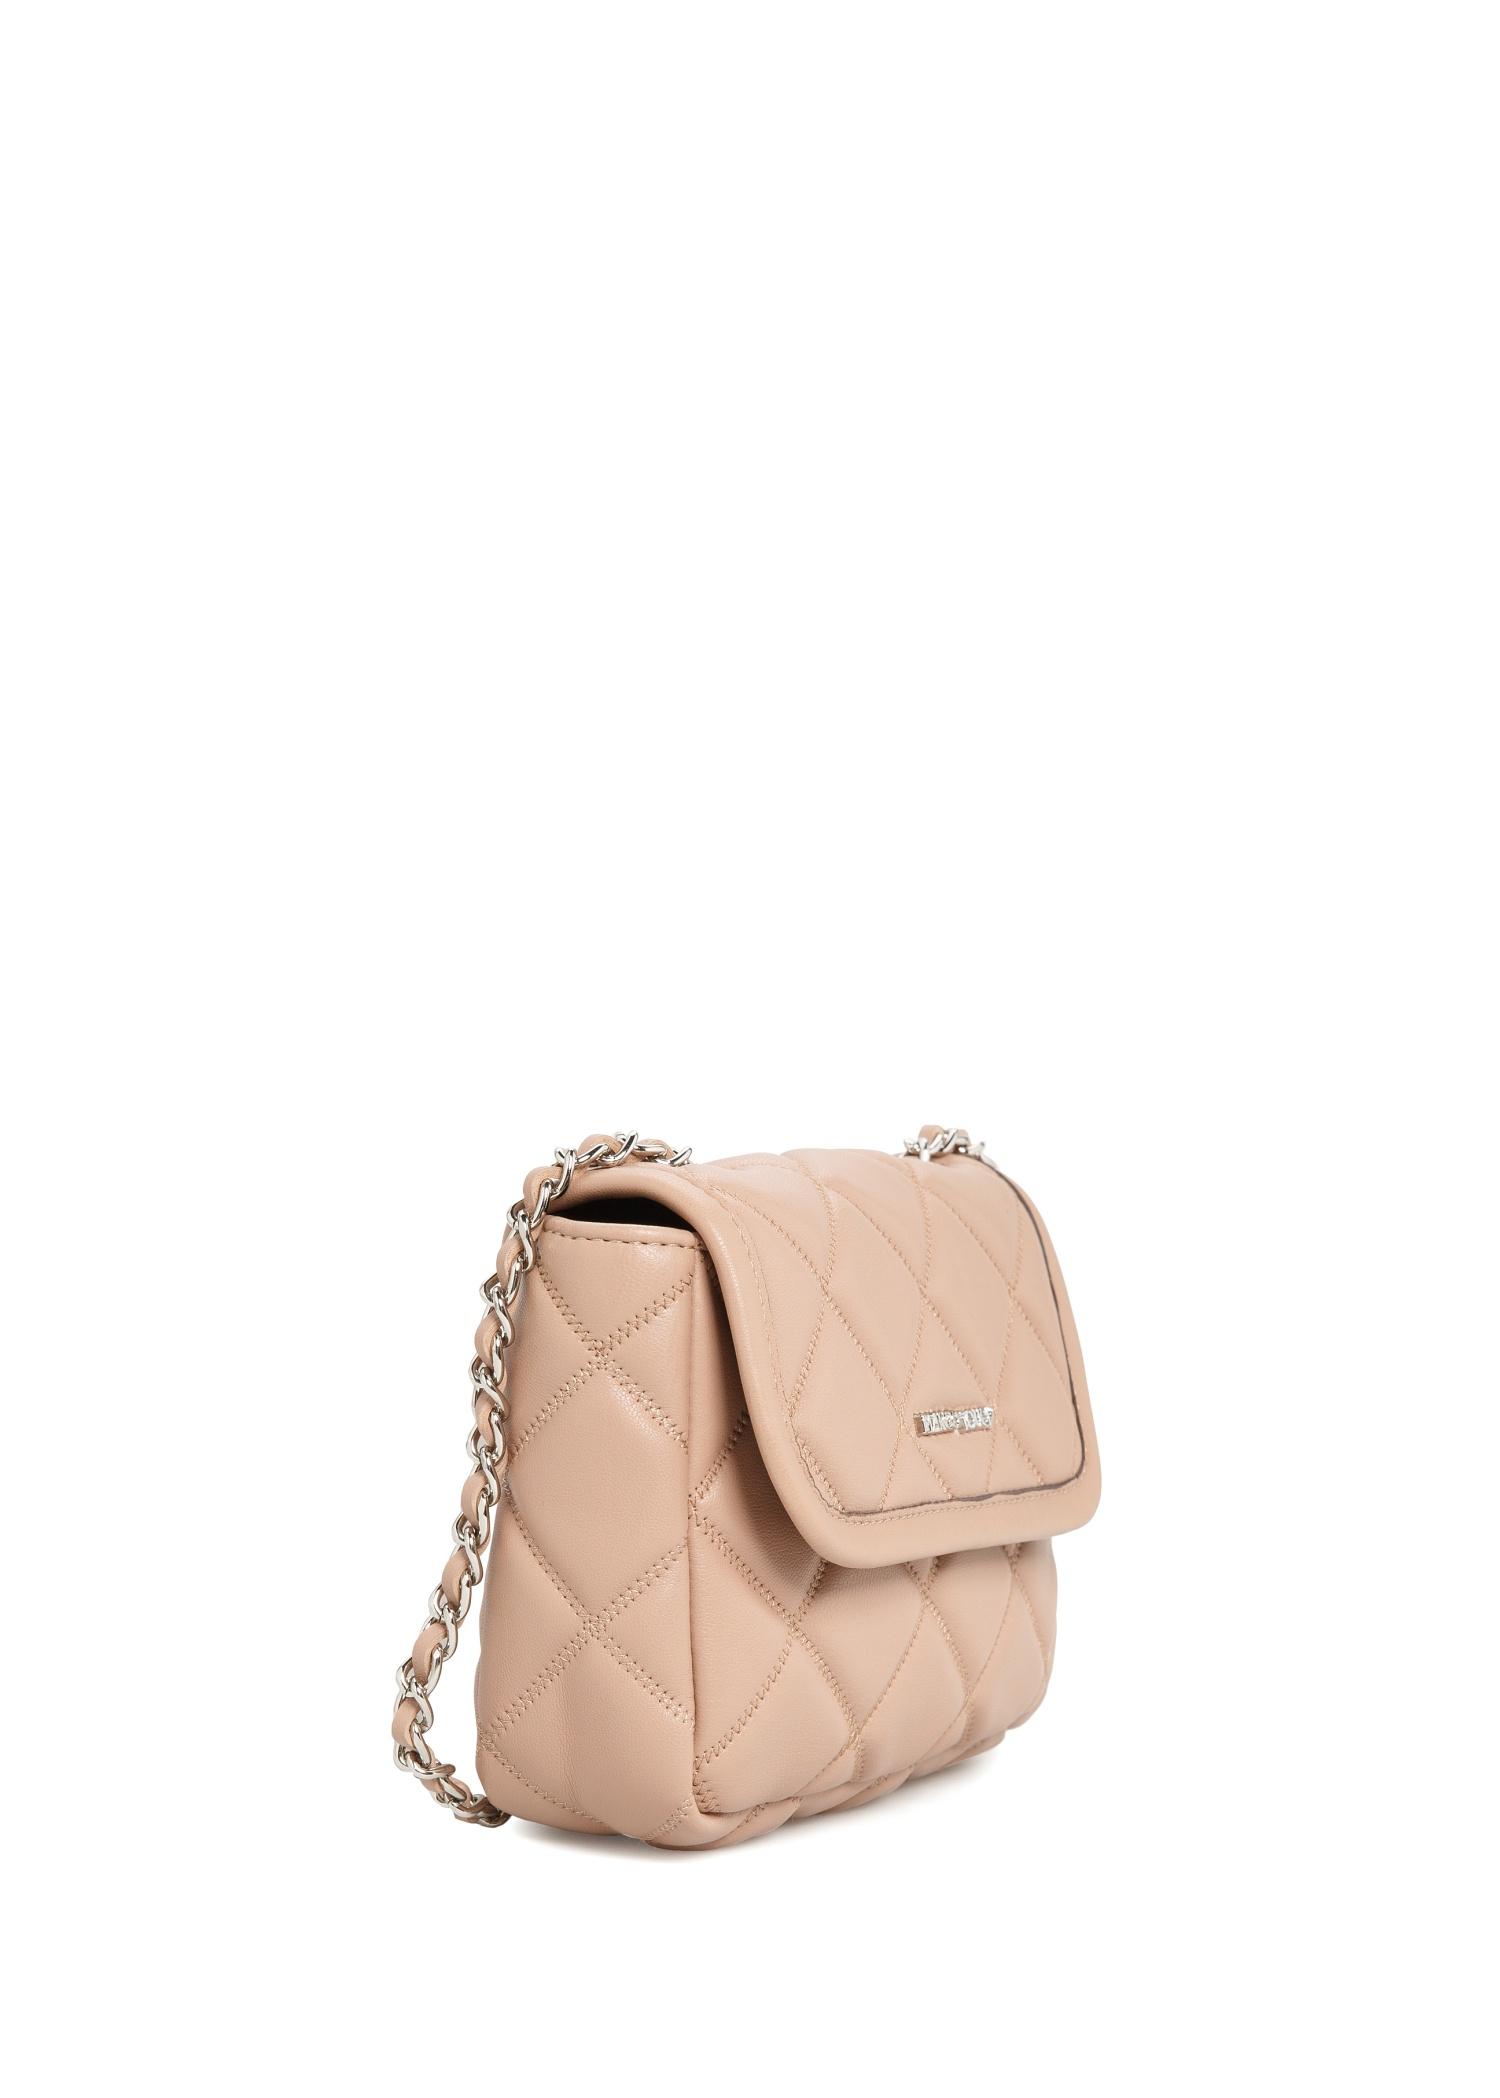 Lyst - Mango Quilted Mini Crossbody Bag in Natural